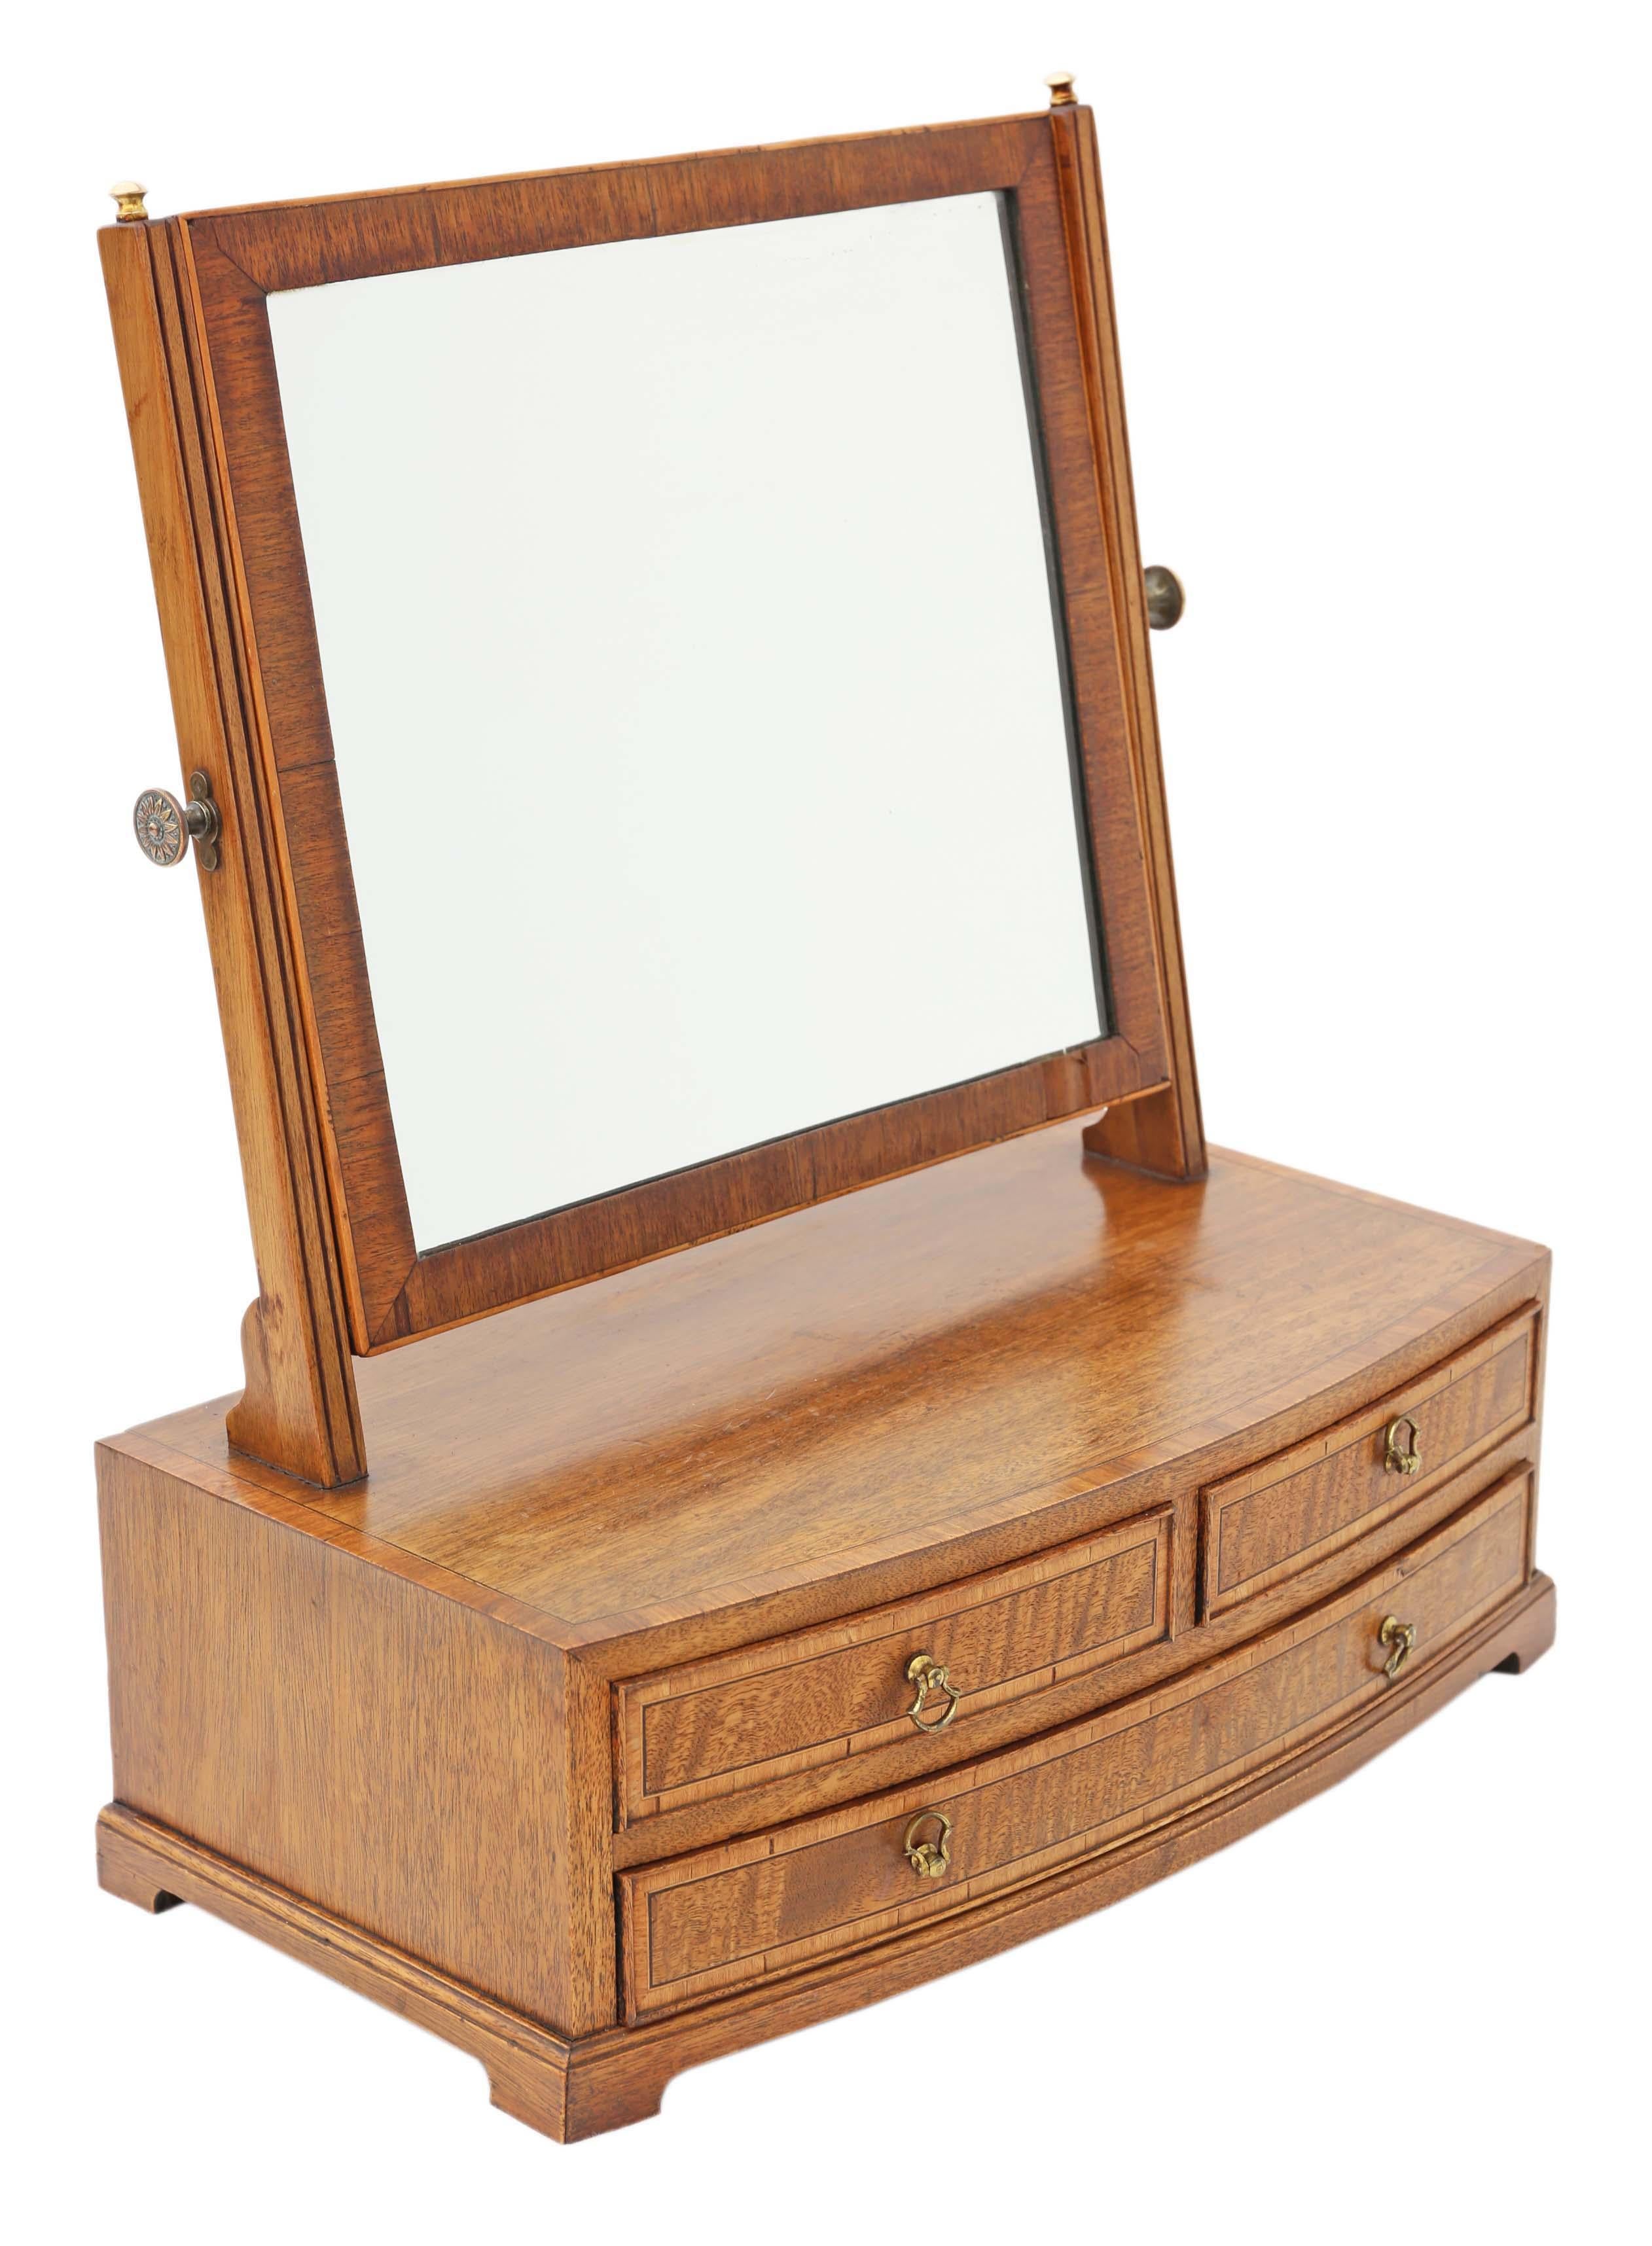 Mahogany dressing table swing mirror toilet 19th century. The mirror holds position well.
Solid and strong, with no loose joints. The mirror is in good order with only very light oxidation. The mahogany lined drawers slide freely.
Would look great